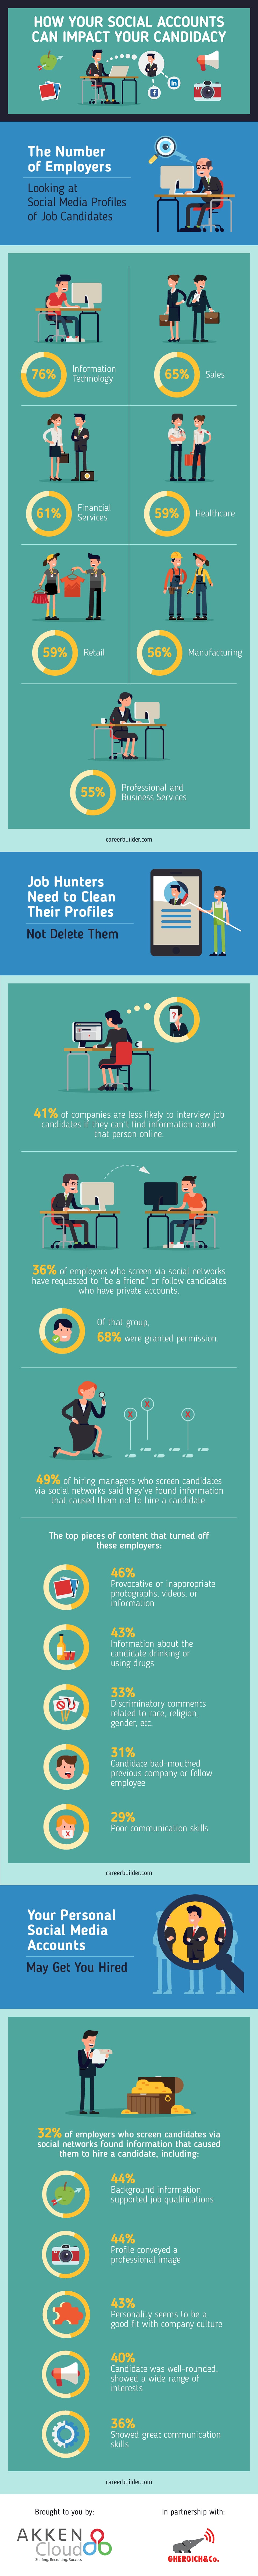 How Your Social Accounts Can Impact Your Candidacy-embed